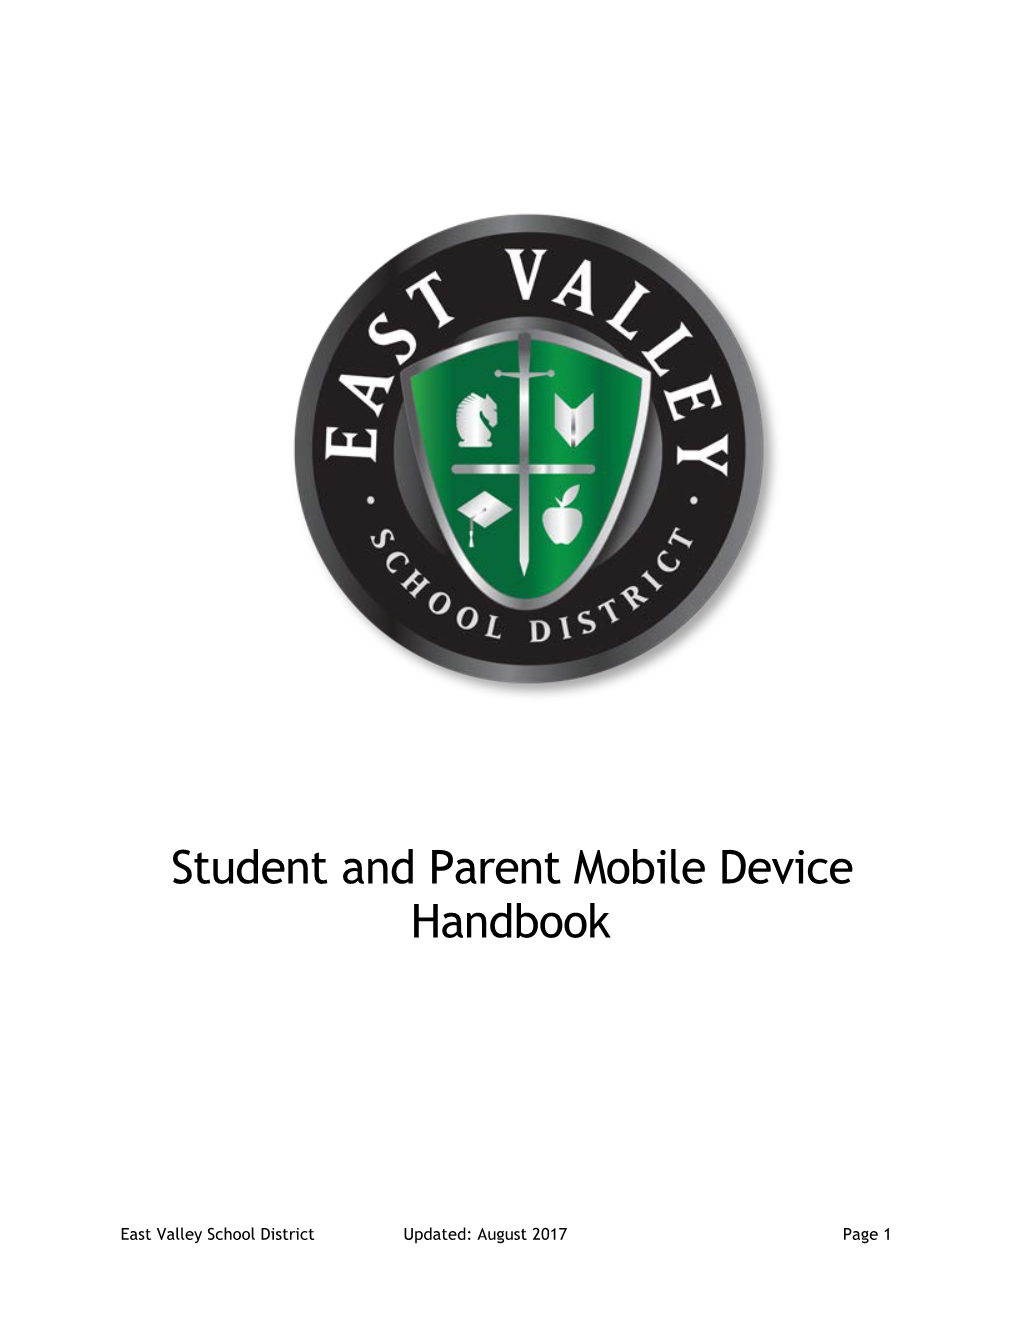 Student and Parent Mobile Device Handbook